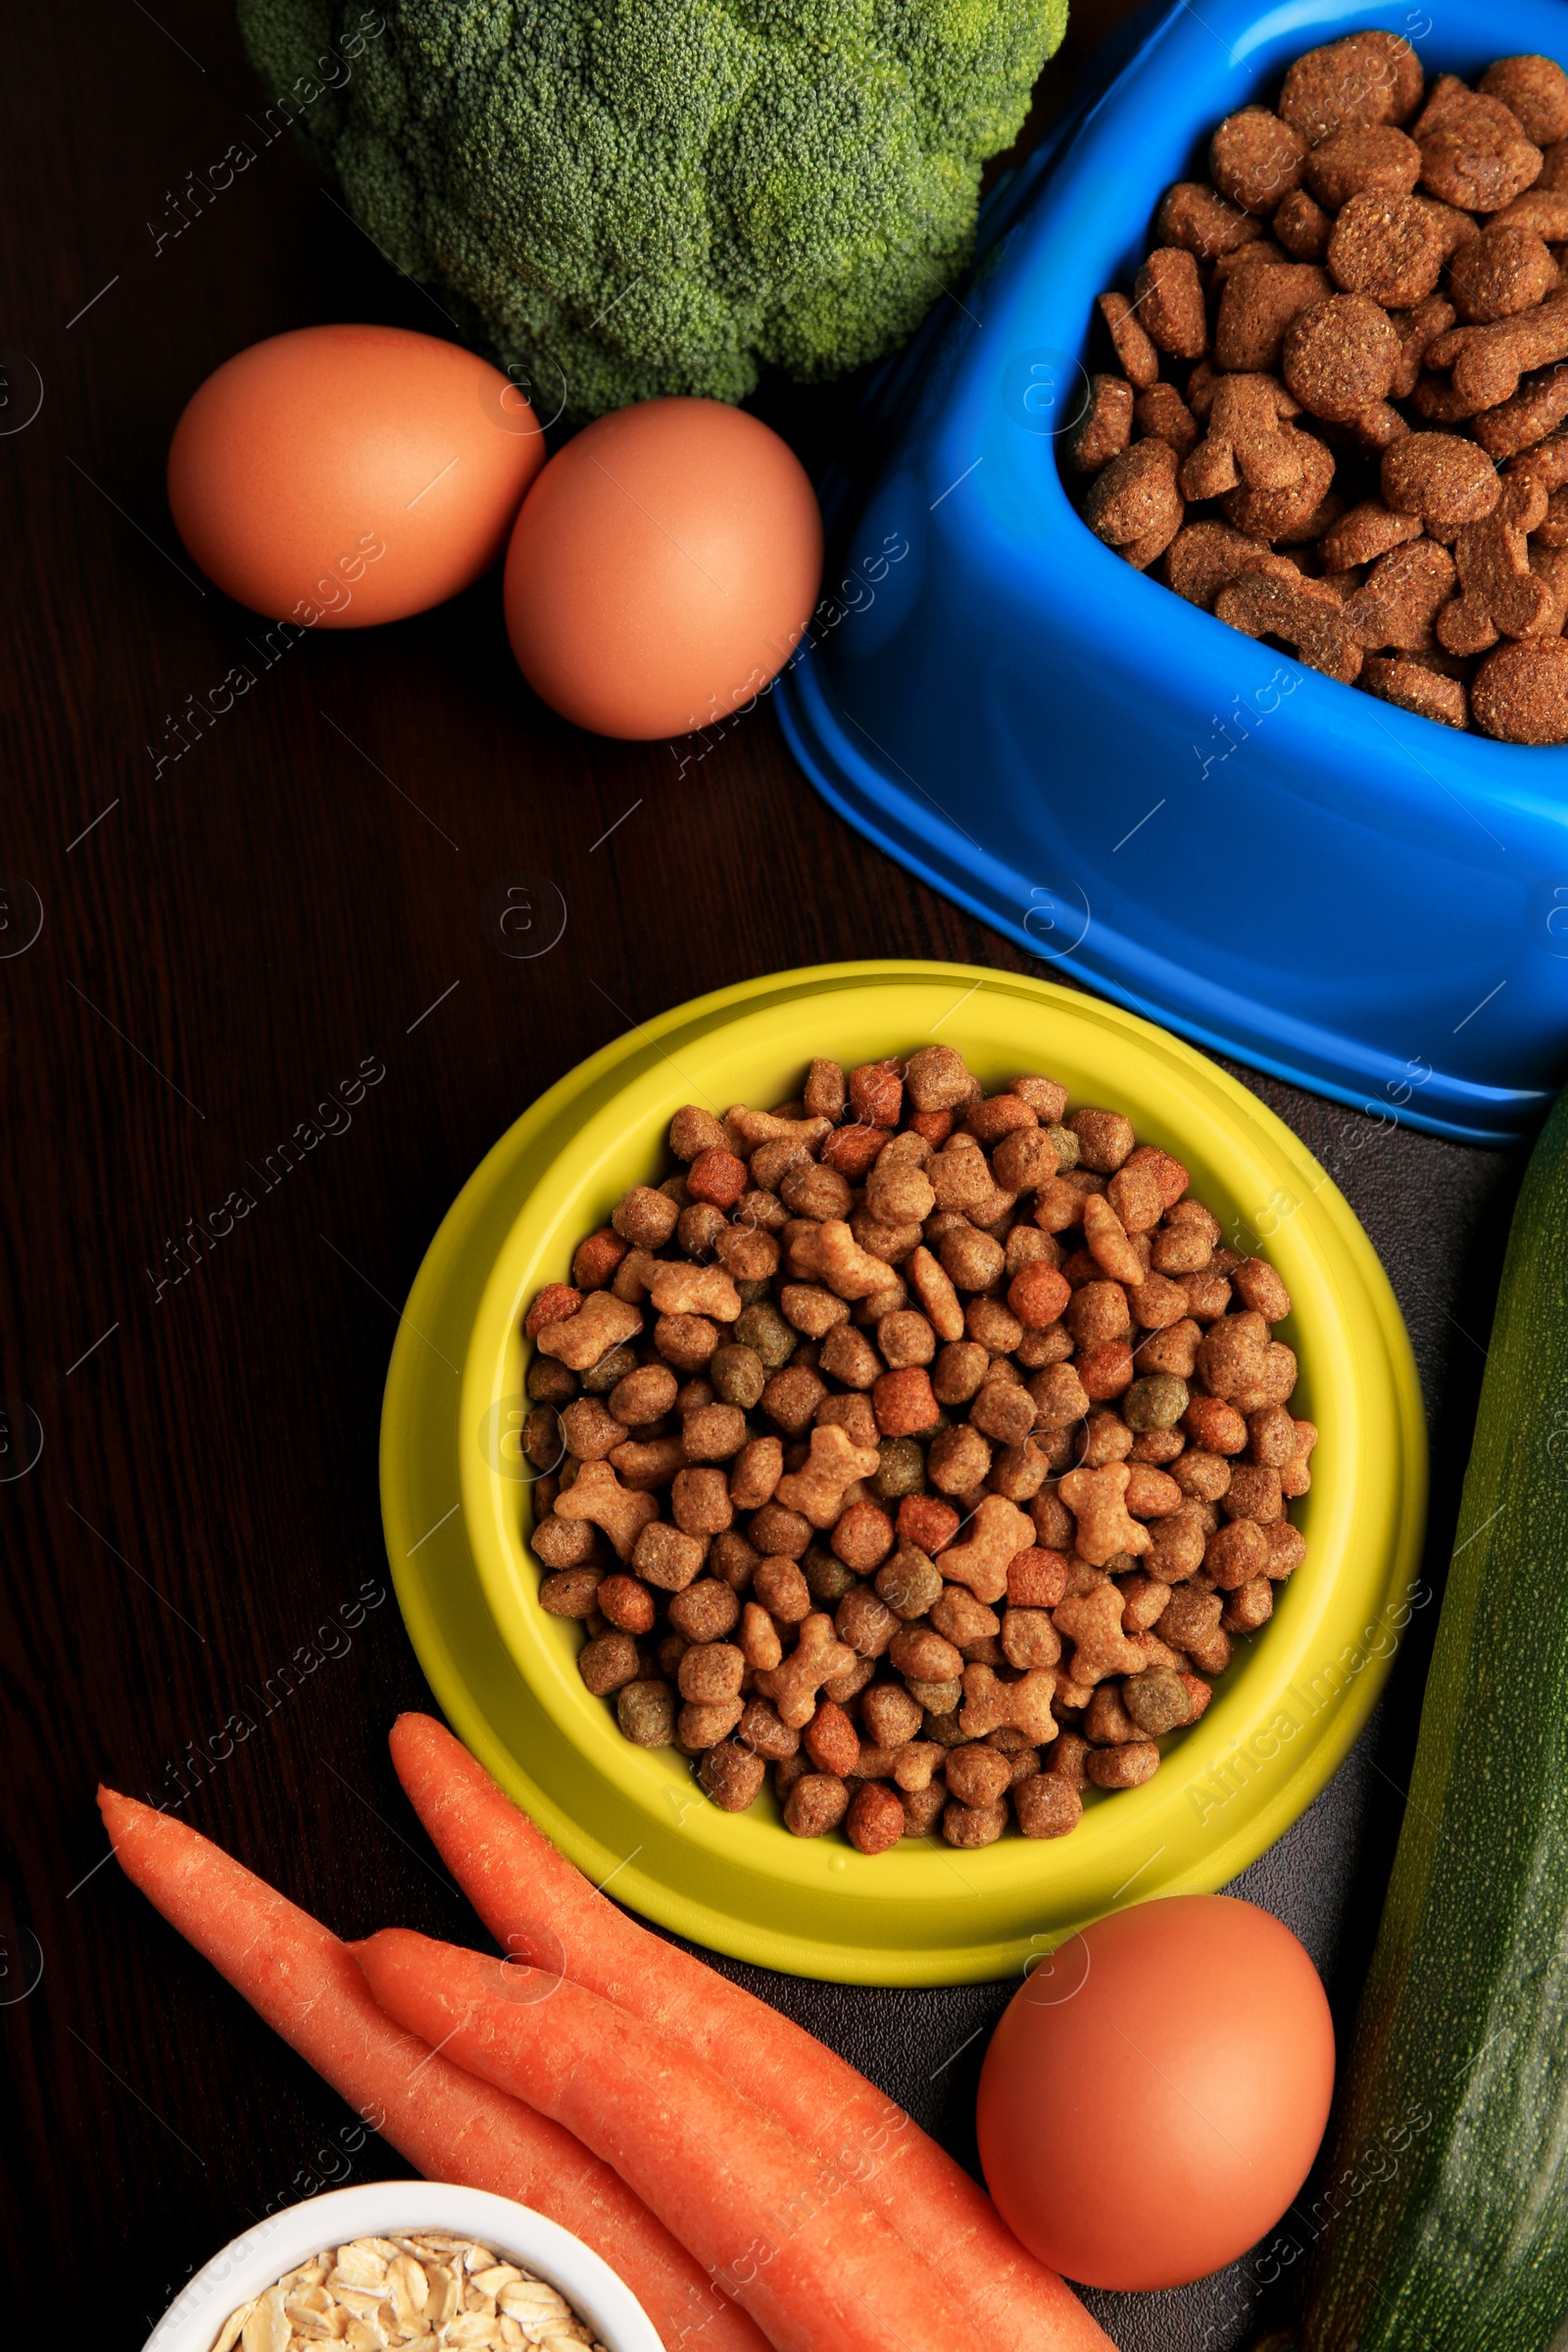 Photo of Dry pet food and products on wooden background, flat lay